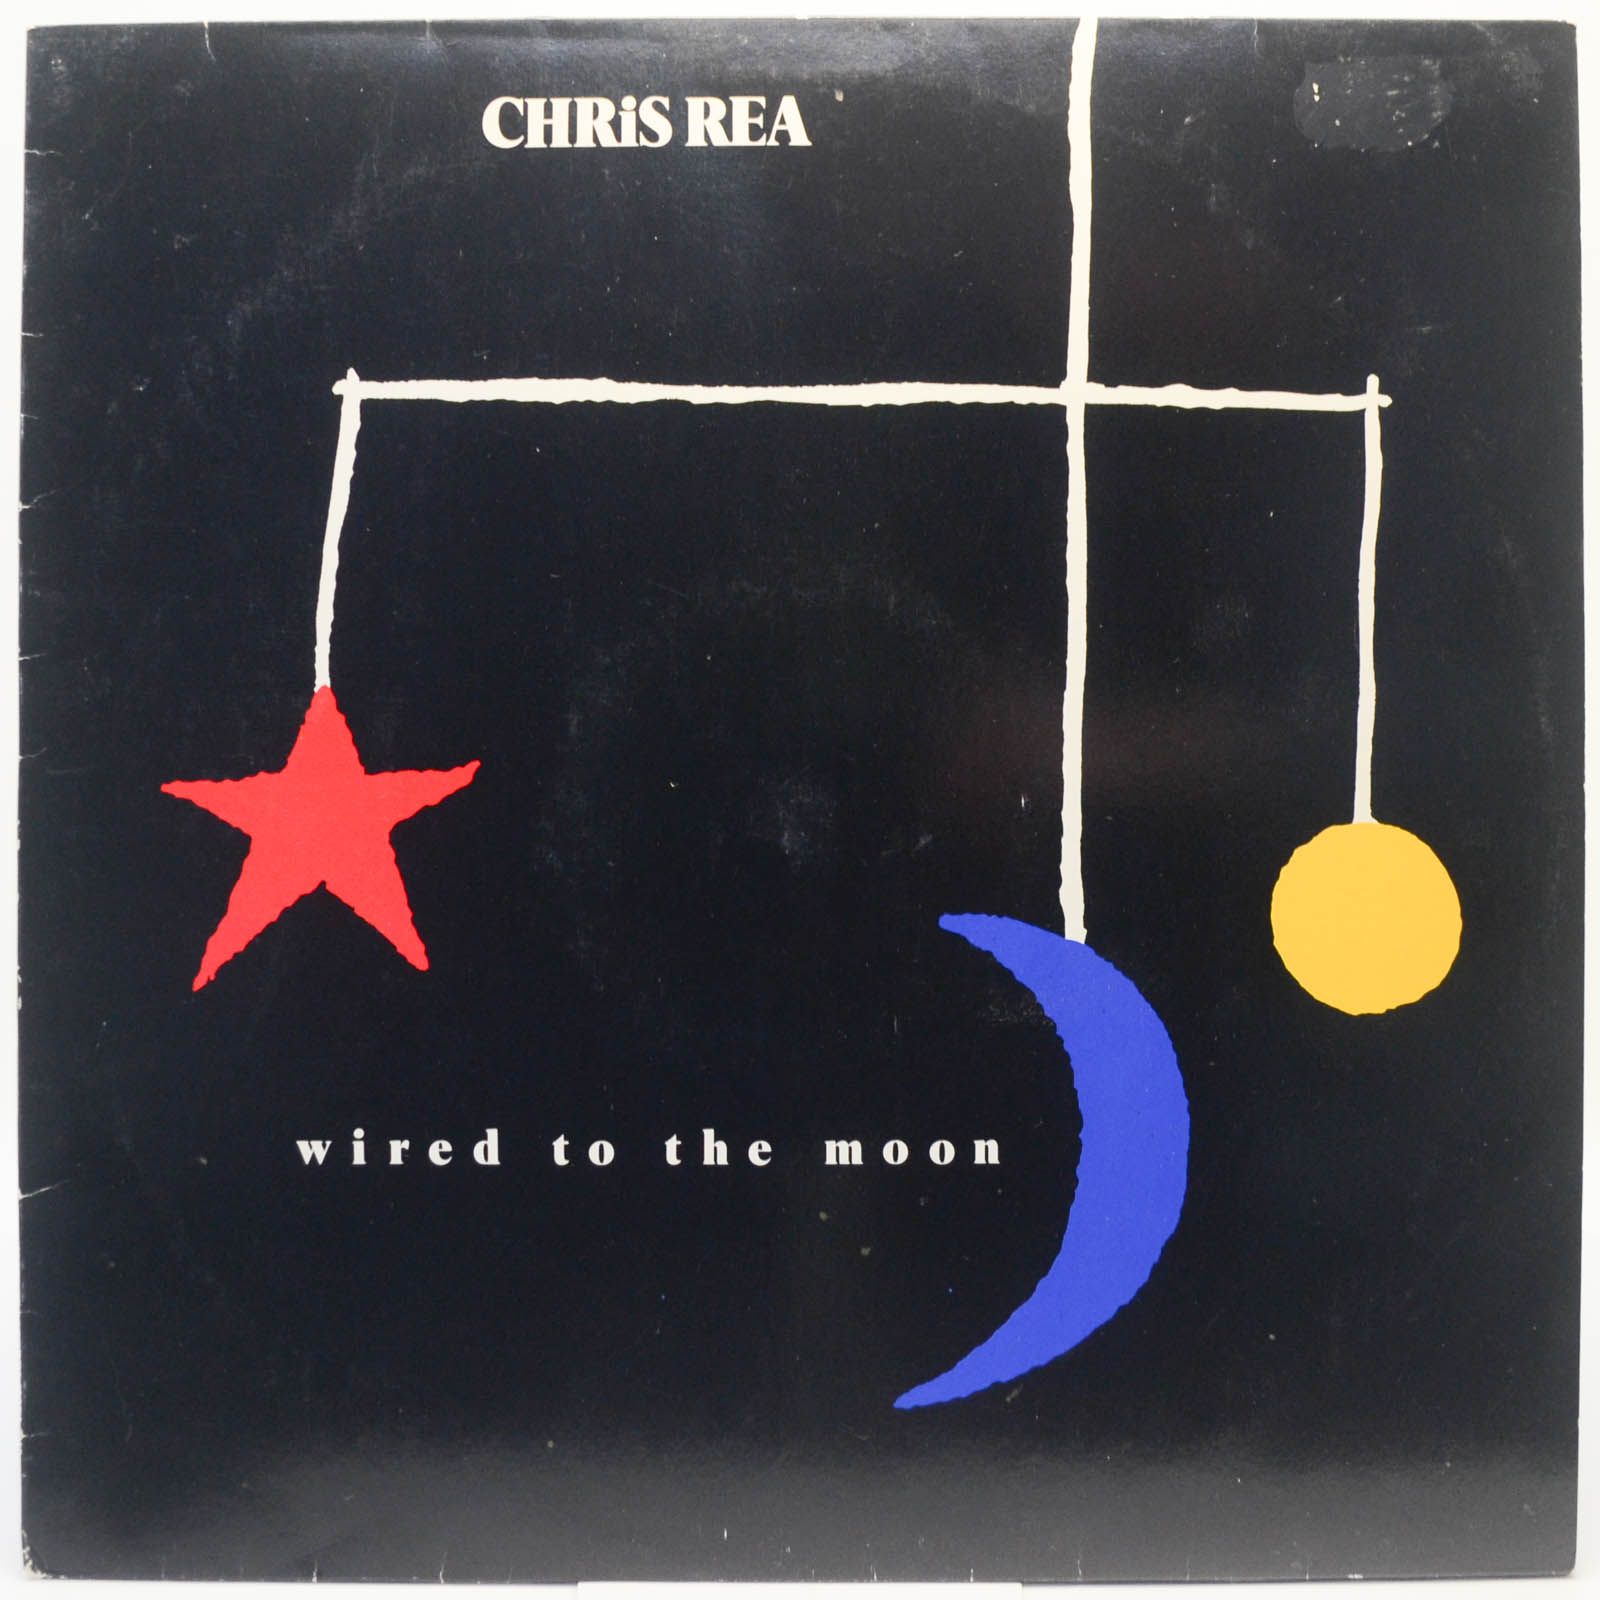 Chris Rea — Wired To The Moon, 1984